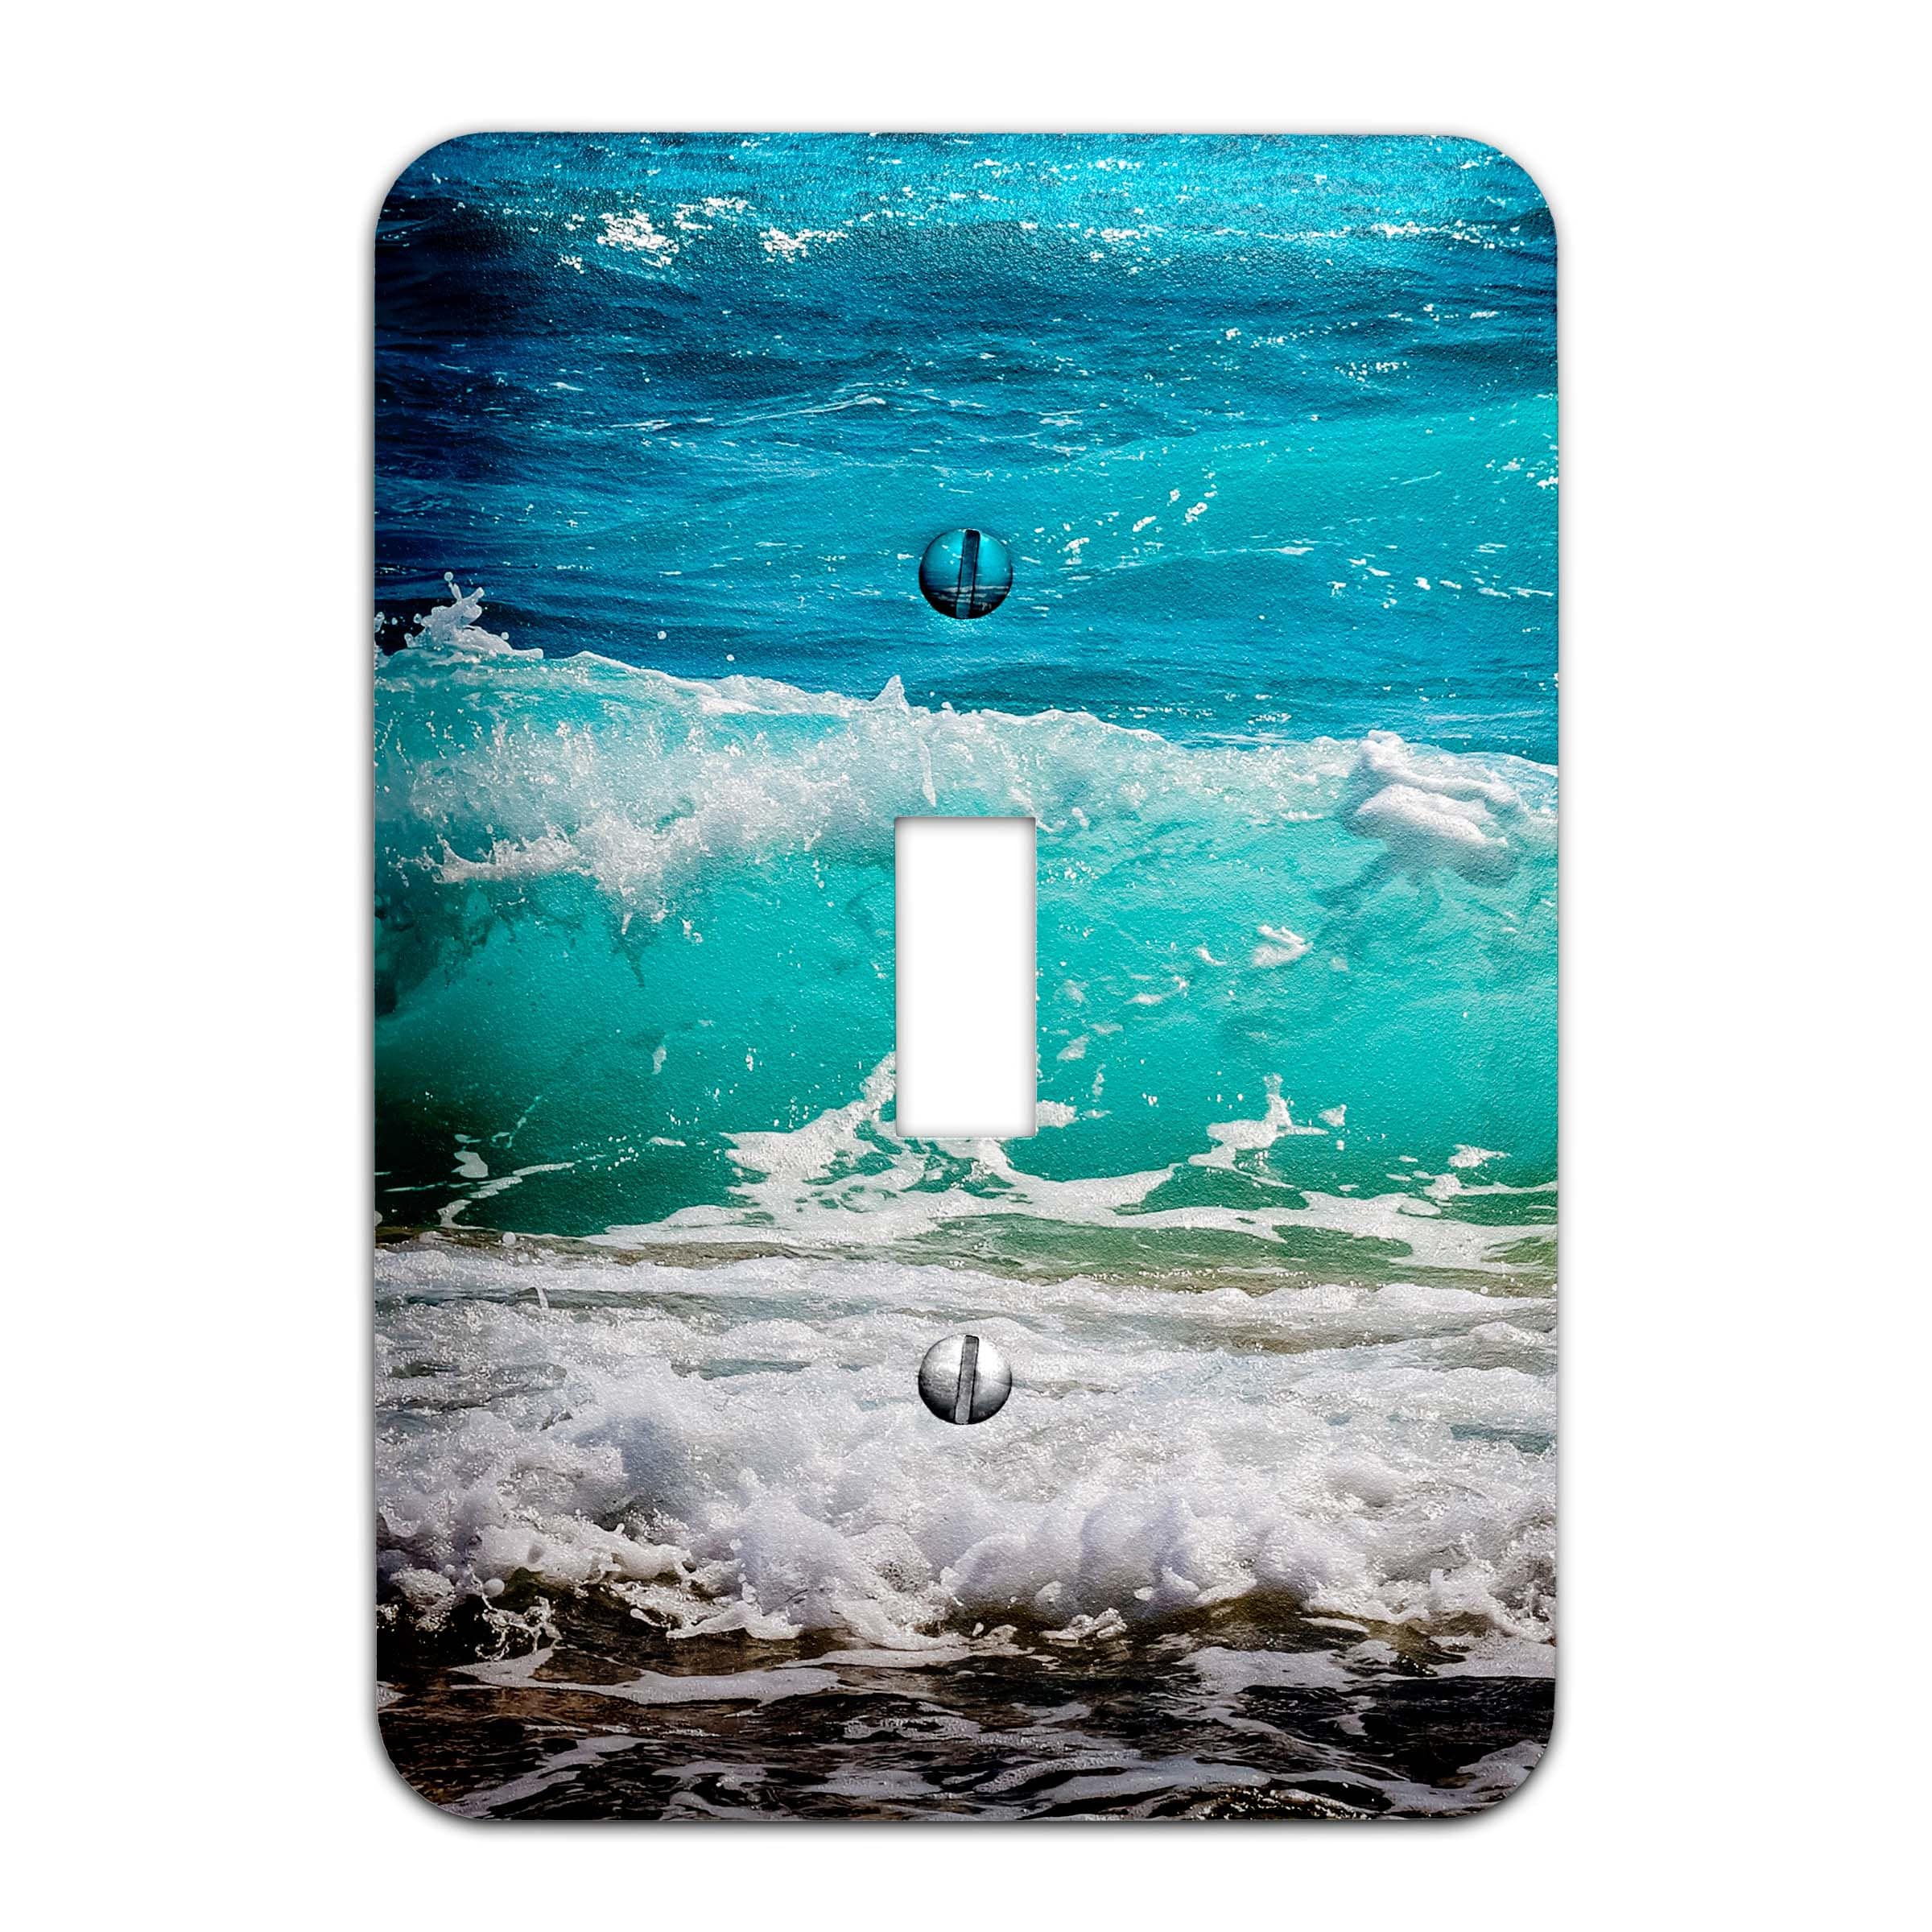 Sea Life themed Over Sized printed switch plate covers, decorative